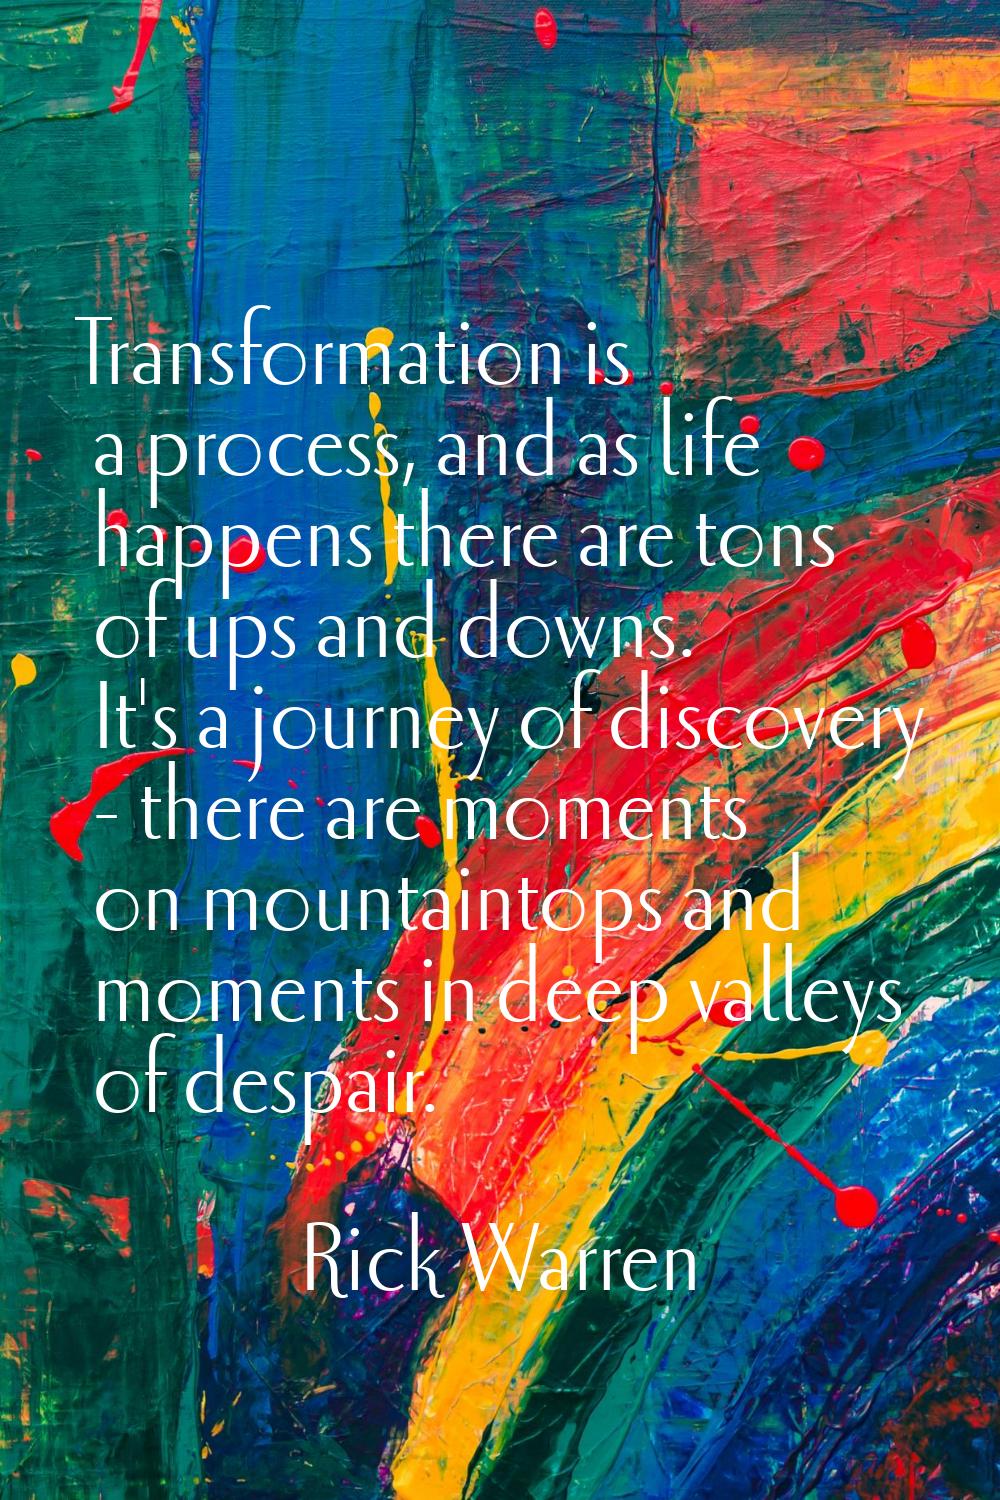 Transformation is a process, and as life happens there are tons of ups and downs. It's a journey of